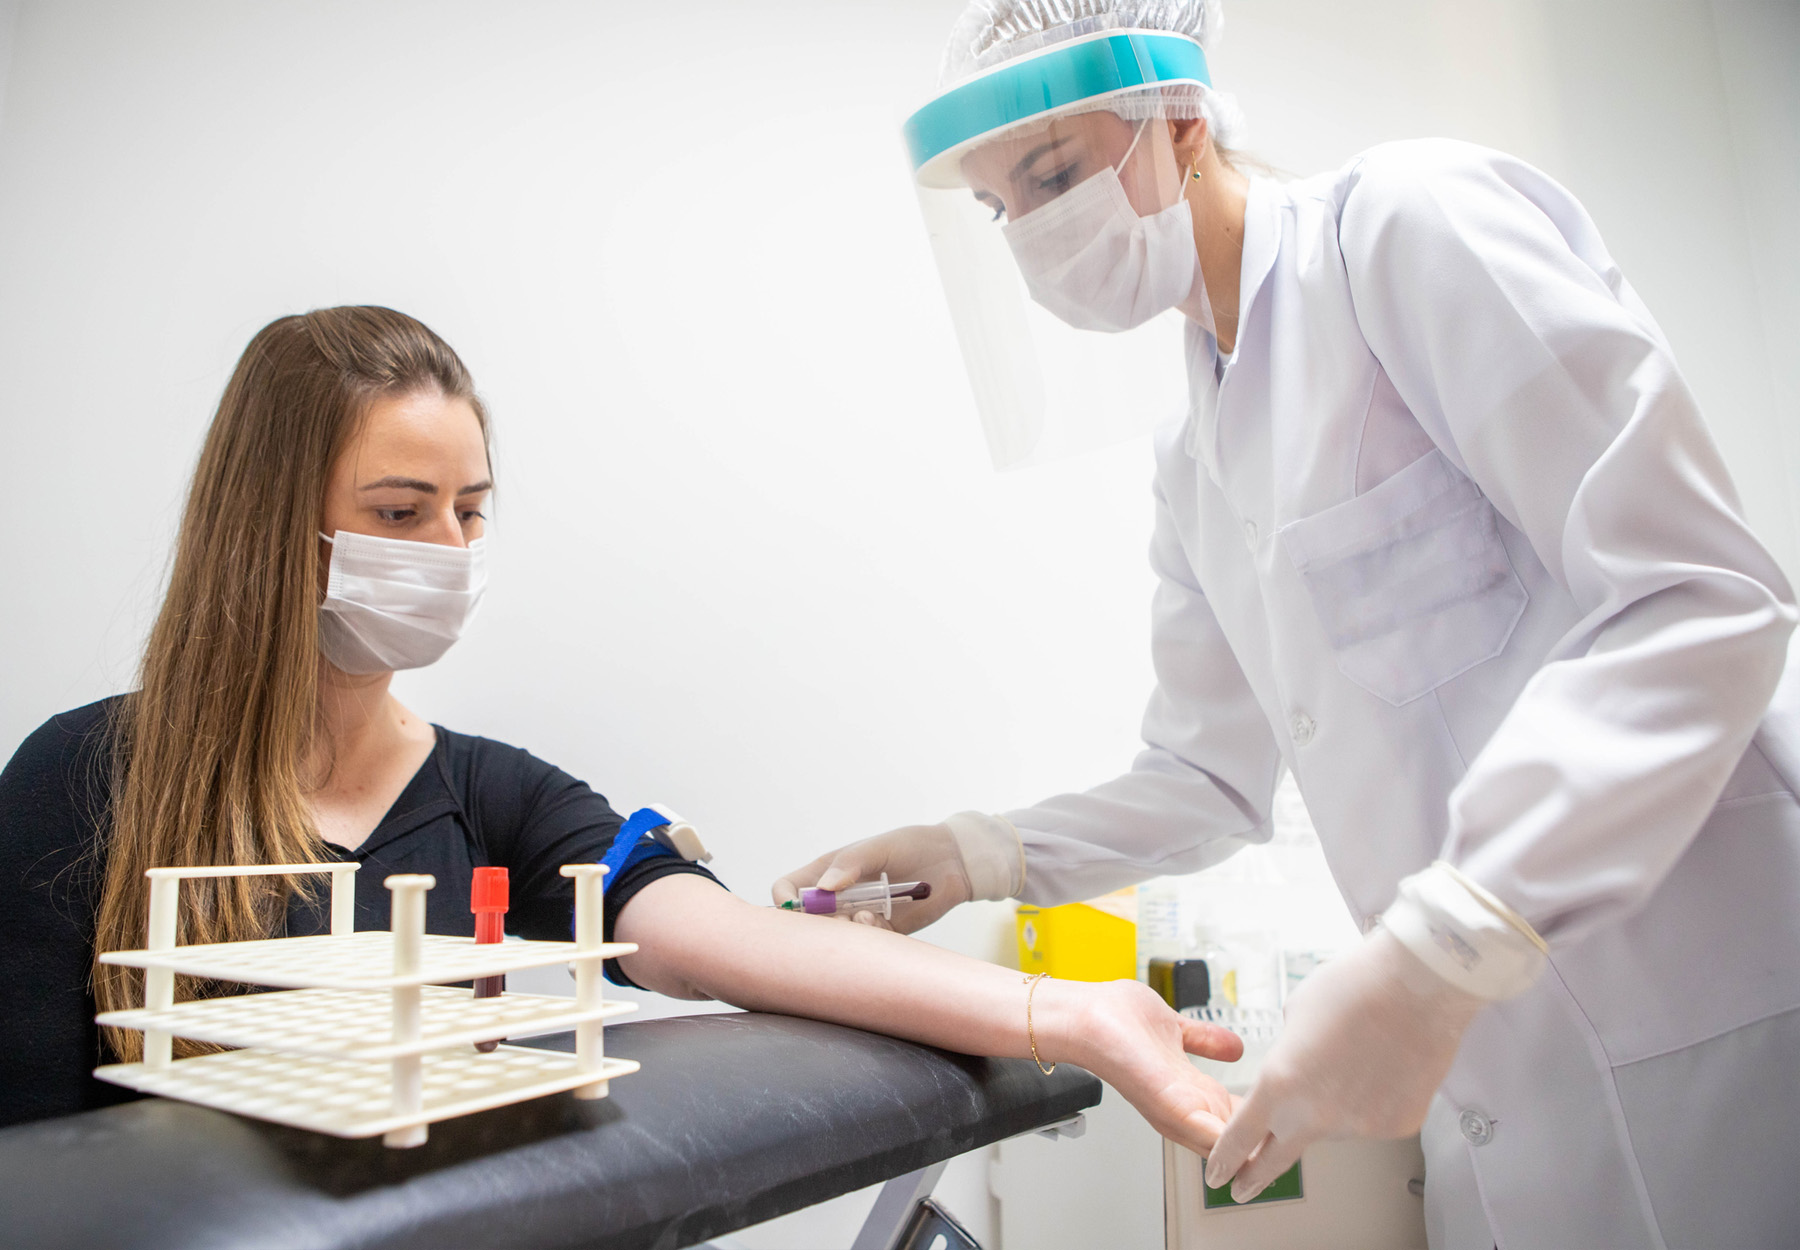 Young, white female healthcare worker in full PPE performing a blood test on a young, white female patient who is wearing a mask. Stock photo.